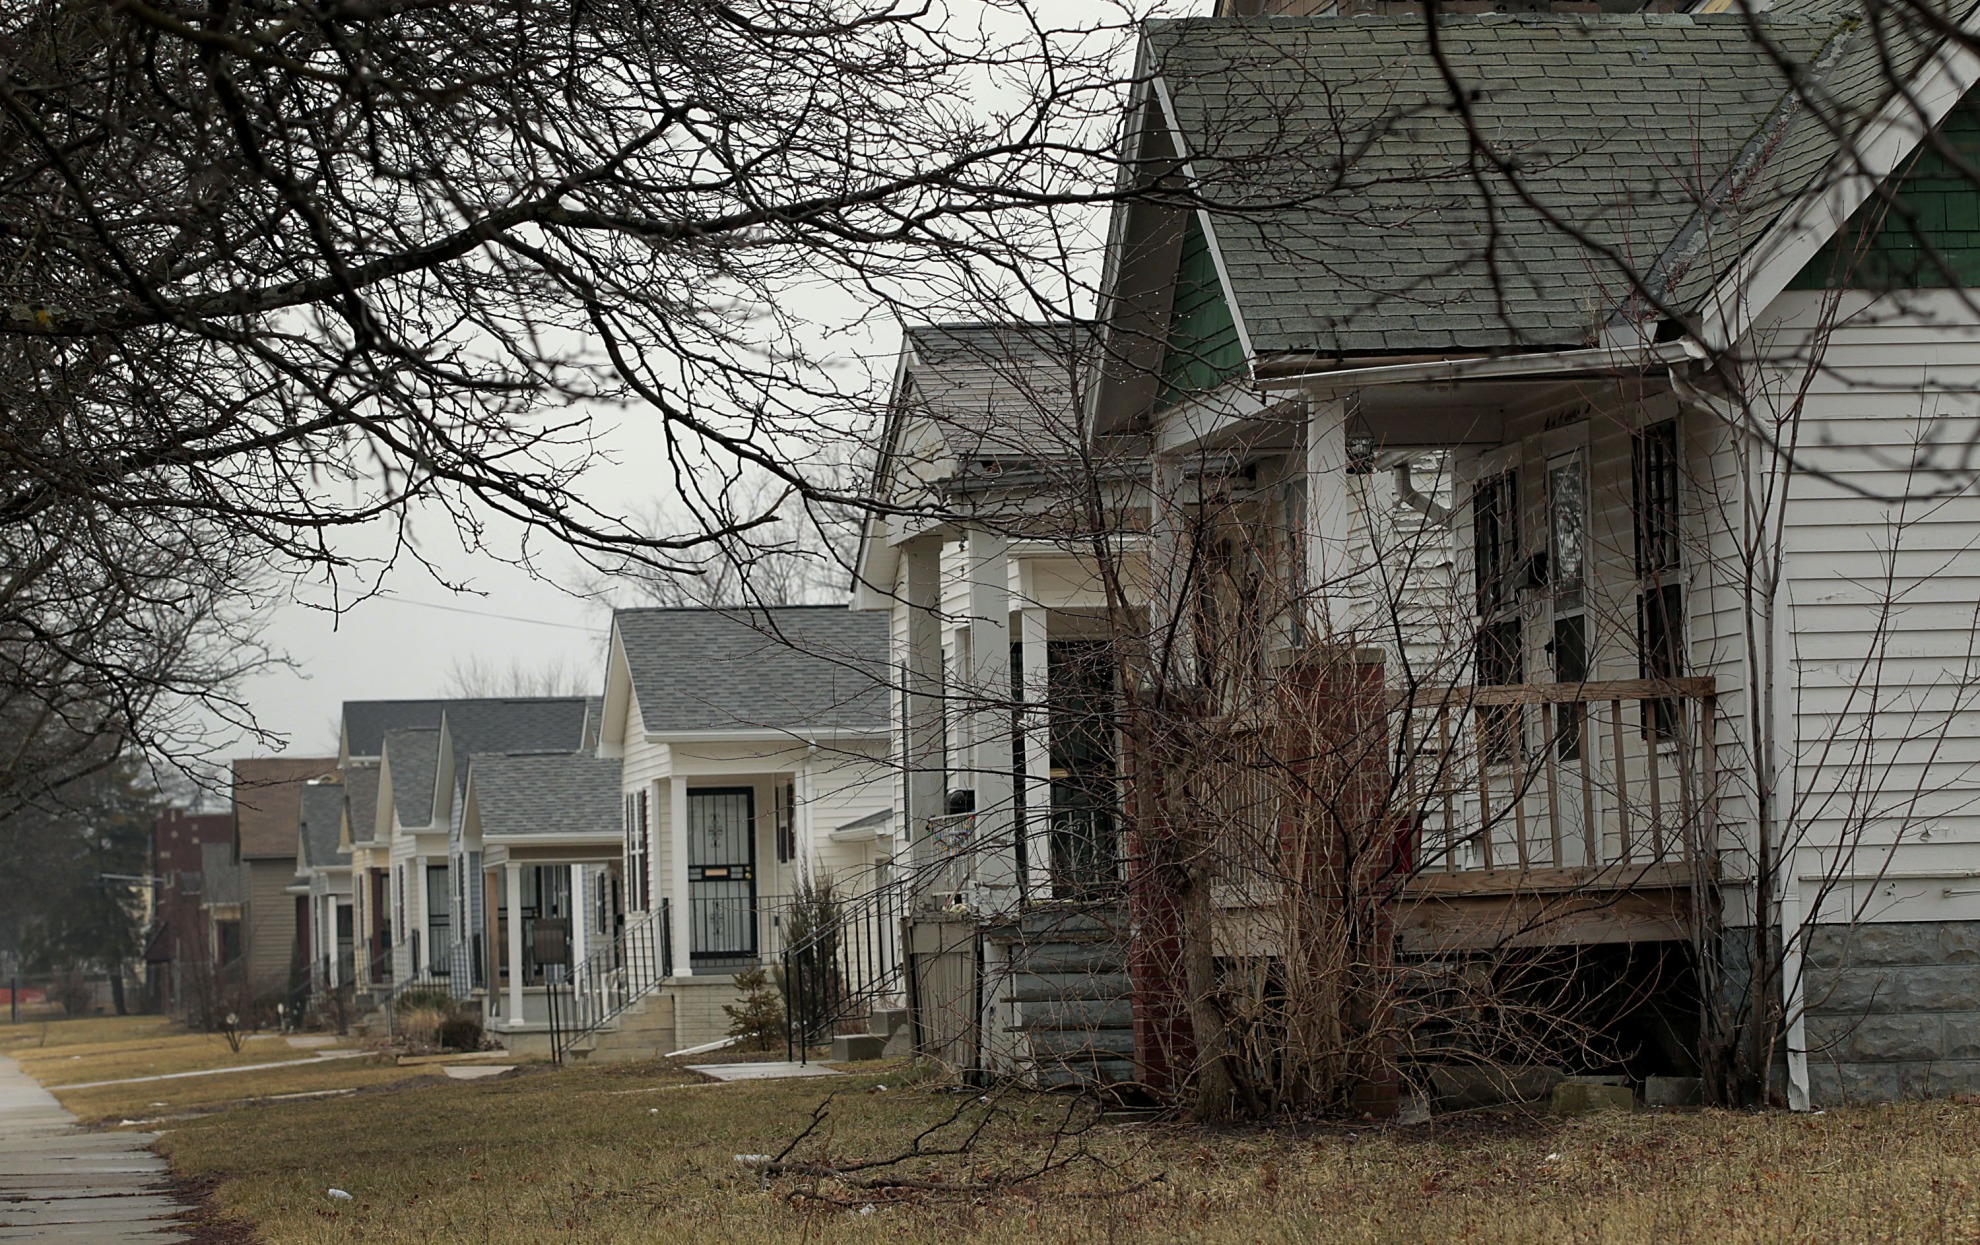 Renovated homes sit next to a home in disrepair in Detroit.